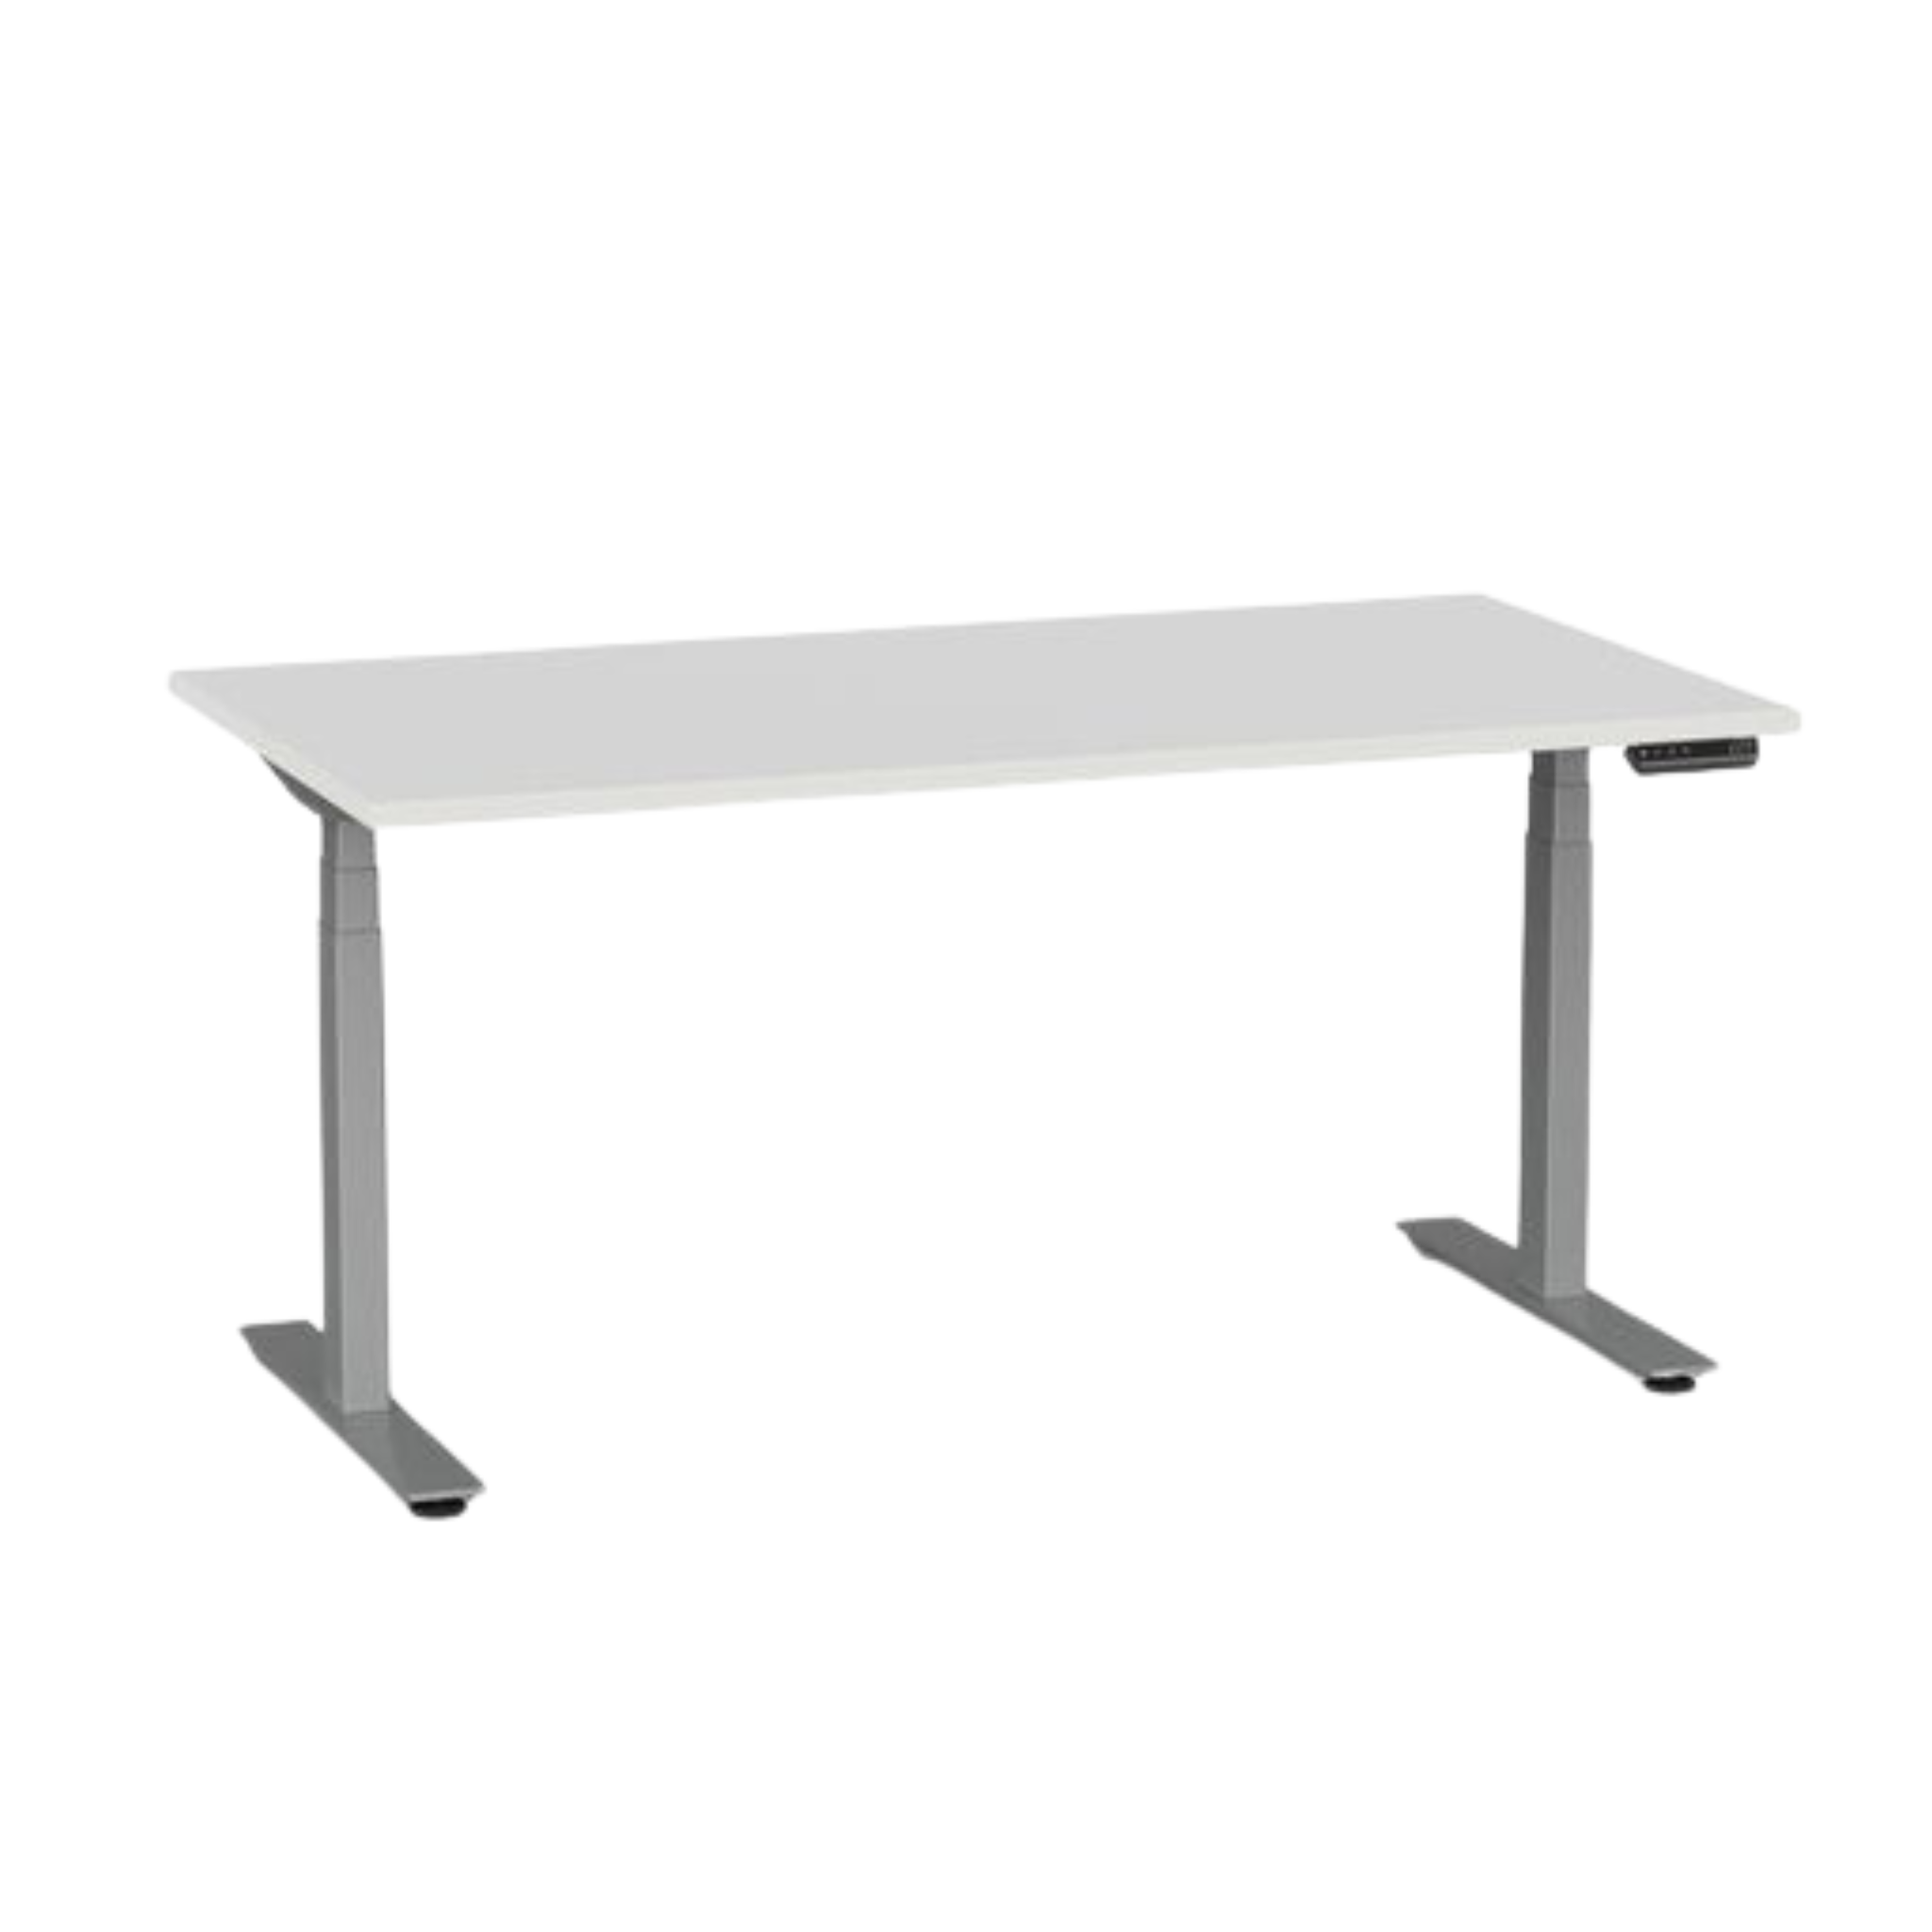 Agile Pro electric sit to stand desk with silver frame and white top